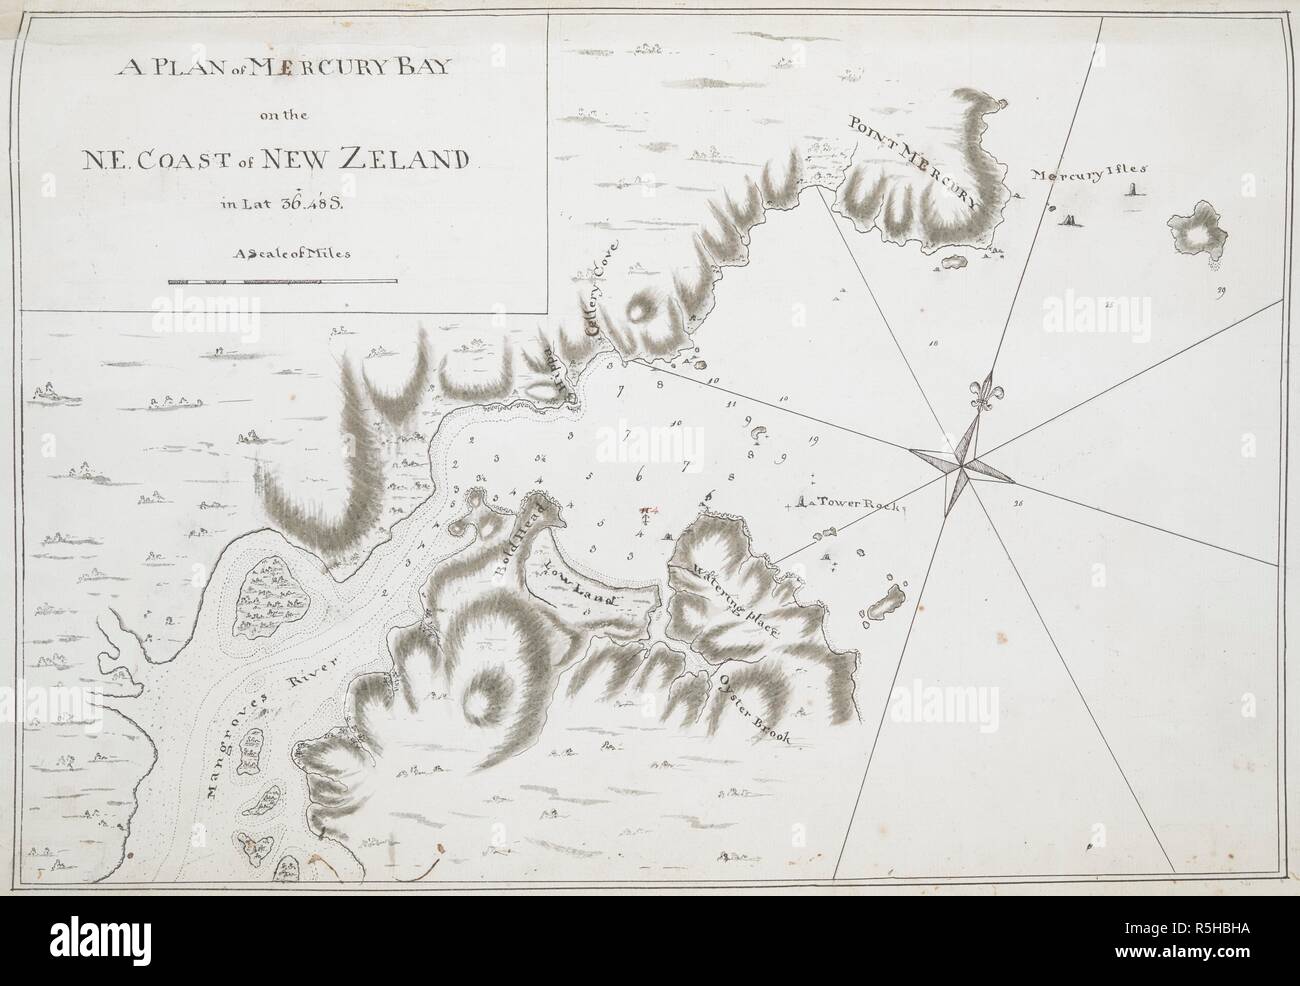 A plan of Mercury Bay, on the N.E. coast of New Zealand; drawn by Lieut. James Cook, on a scale of one inch to a mile. Charts, Plans, Views, and Drawings taken on board the Endeavour during Captain Cook's First Voyage, 1768-1771. 1769. Ms. 1 f. 4 1/2 in. x 11 1/2 in.; 42 x 29 cm.; Scale 1: 63 360. 1 inch to a mile. Source: Add. 7085, No.24. Stock Photo